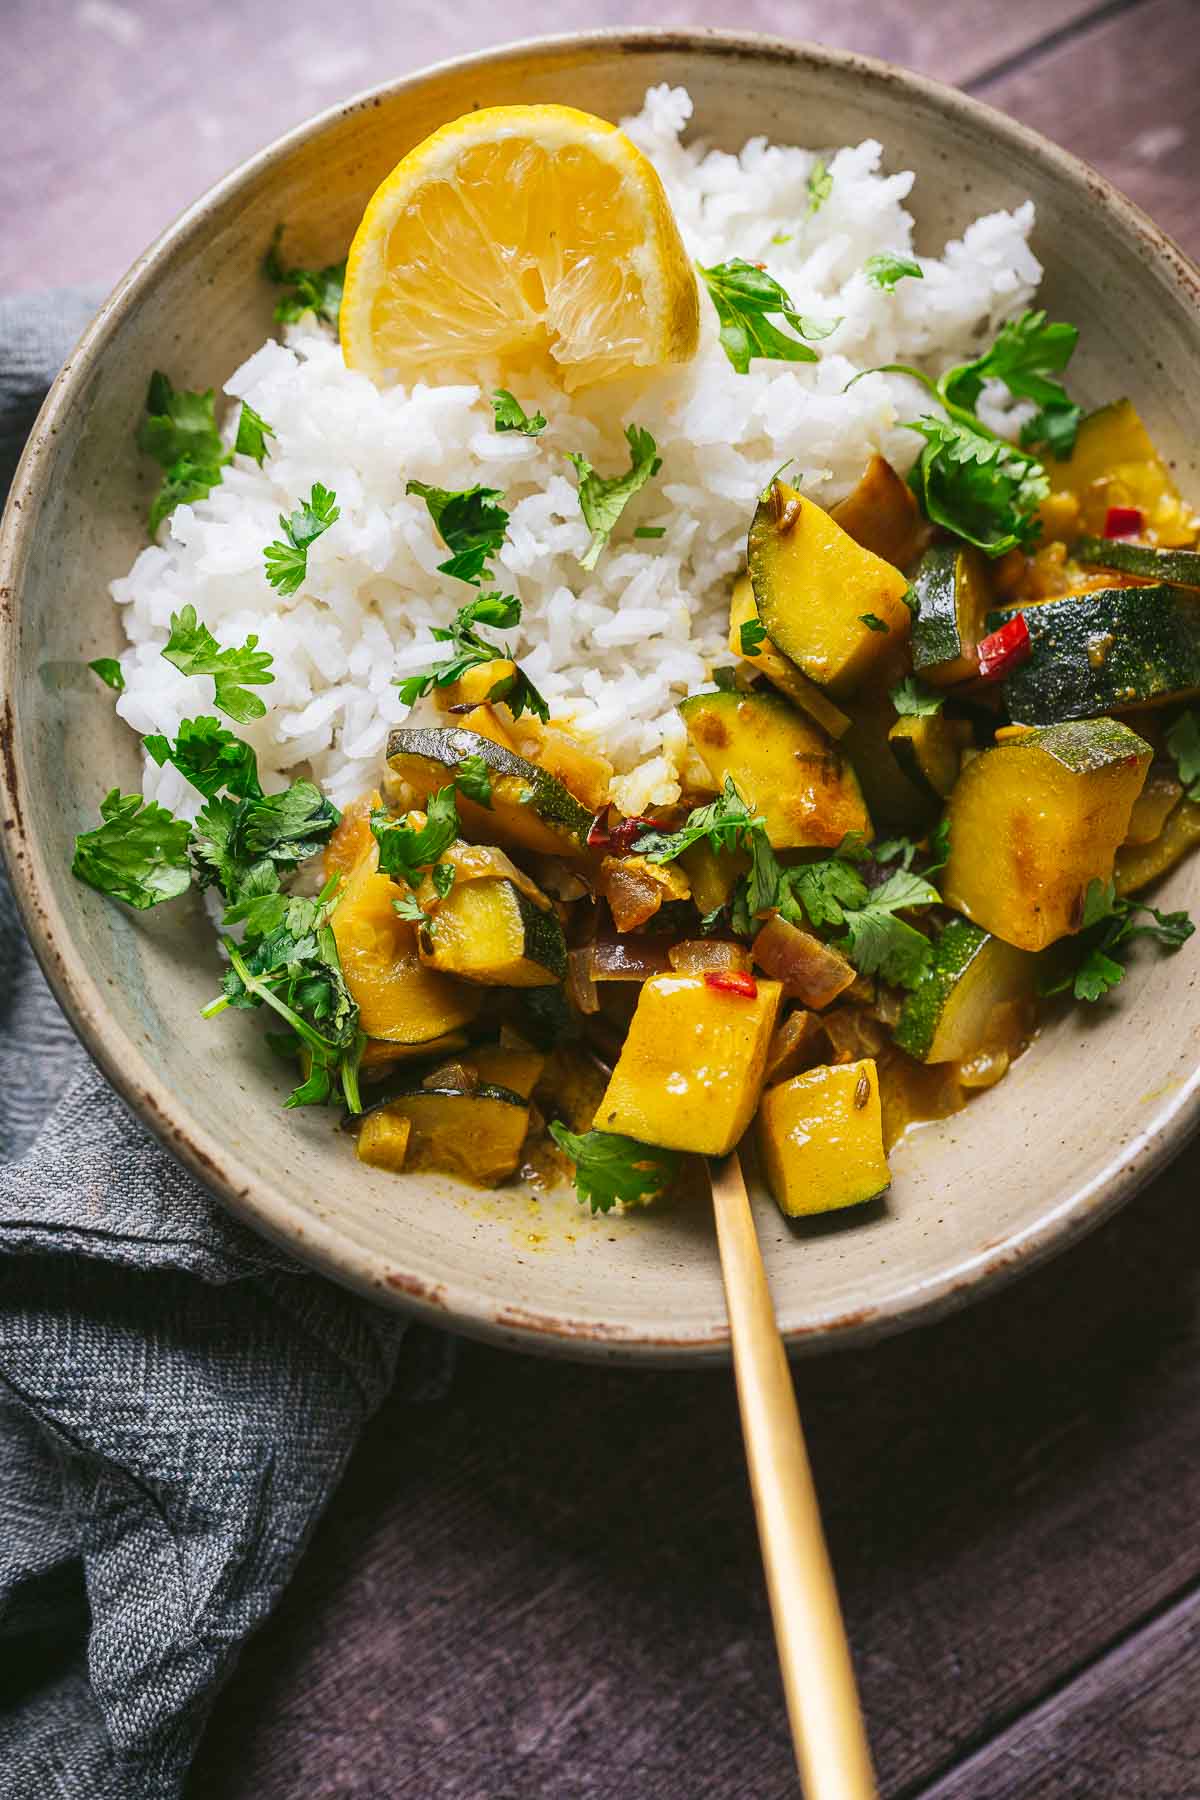 Zucchini curry over rice in a large gray ceramic bowl.